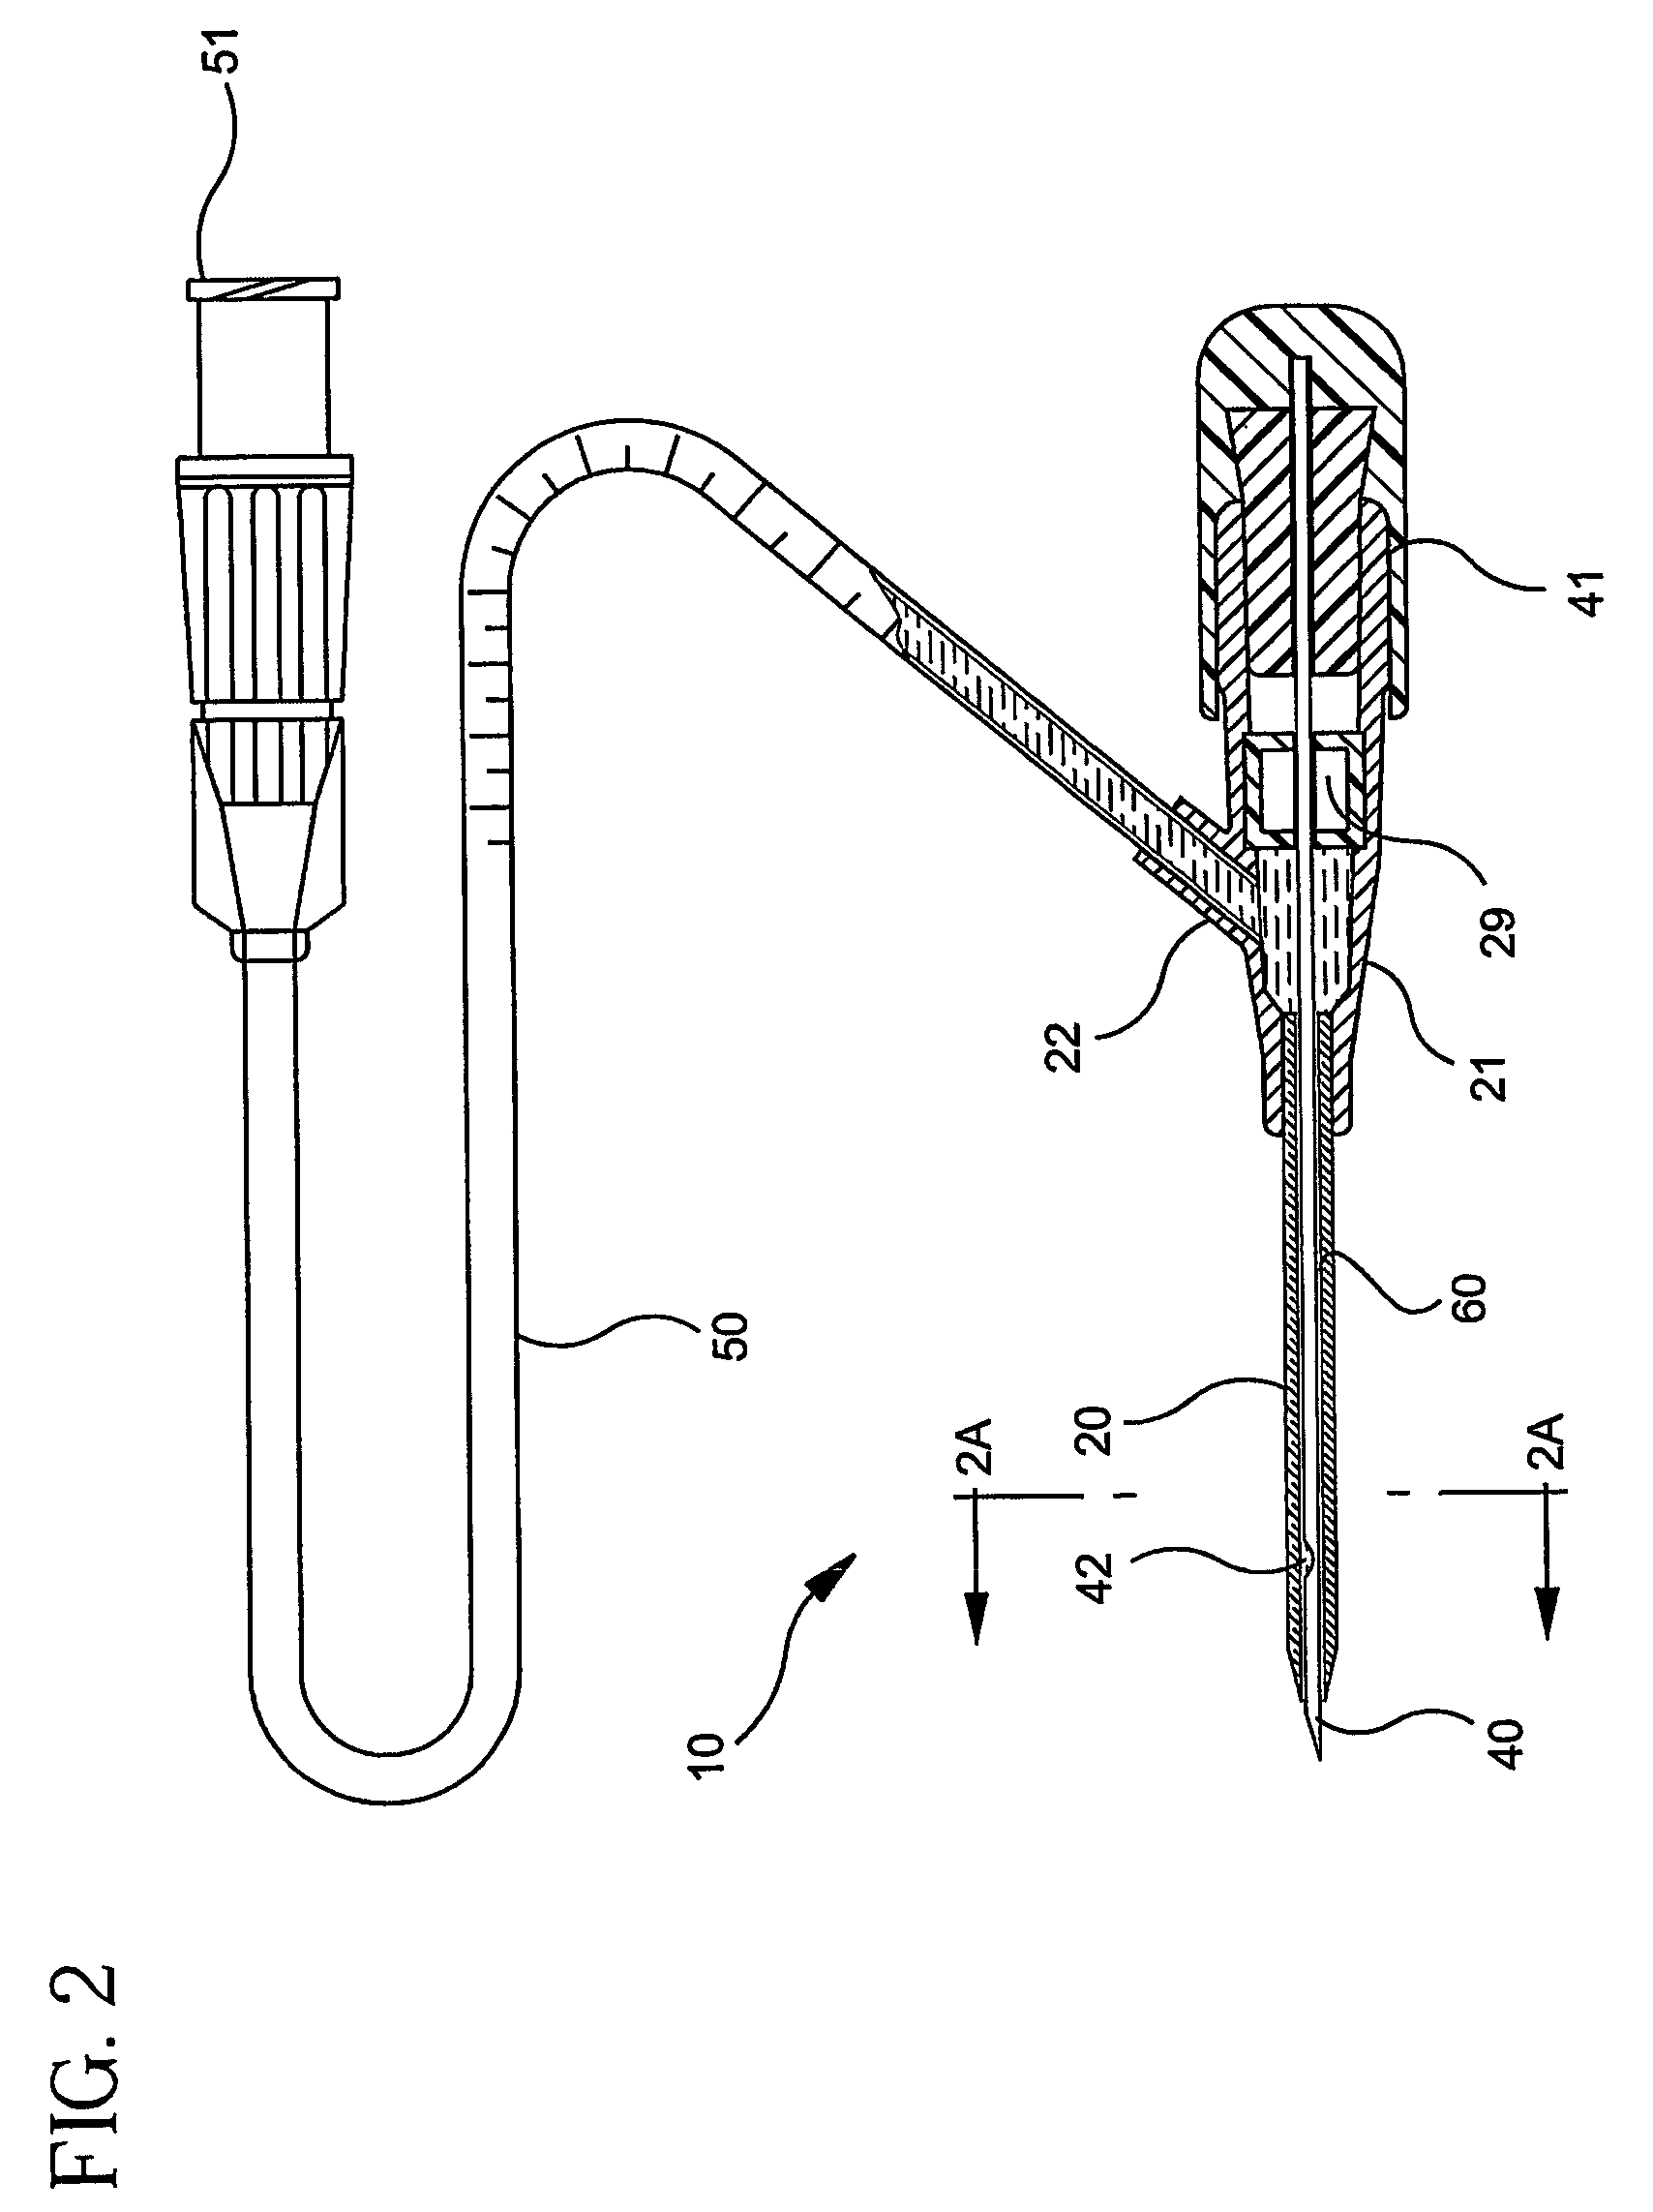 Method of and apparatus for controlling flashback in an introducer needle and catheter assembly